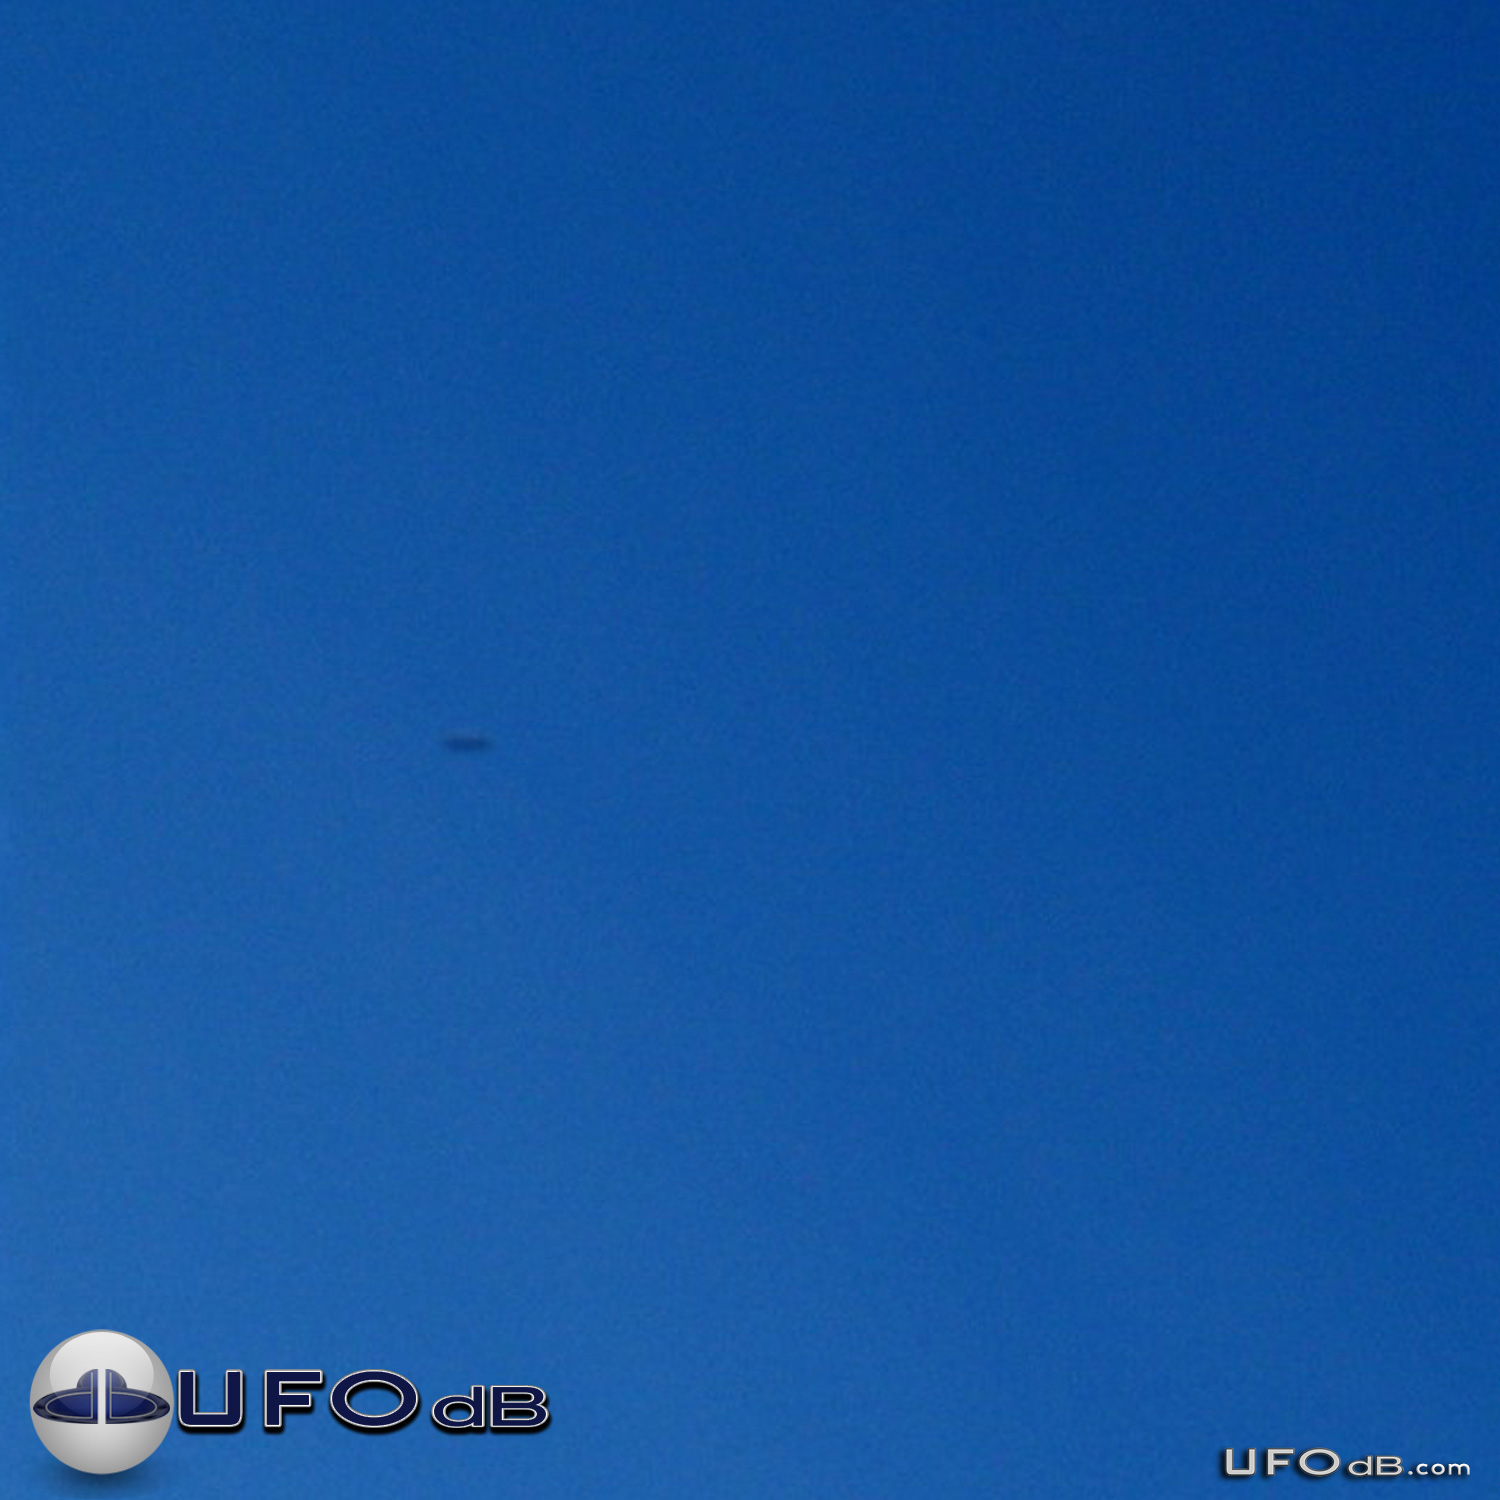 Classic Saucer UFO over West Sussex in England | U.K. February 17 2011 UFO Picture #265-1